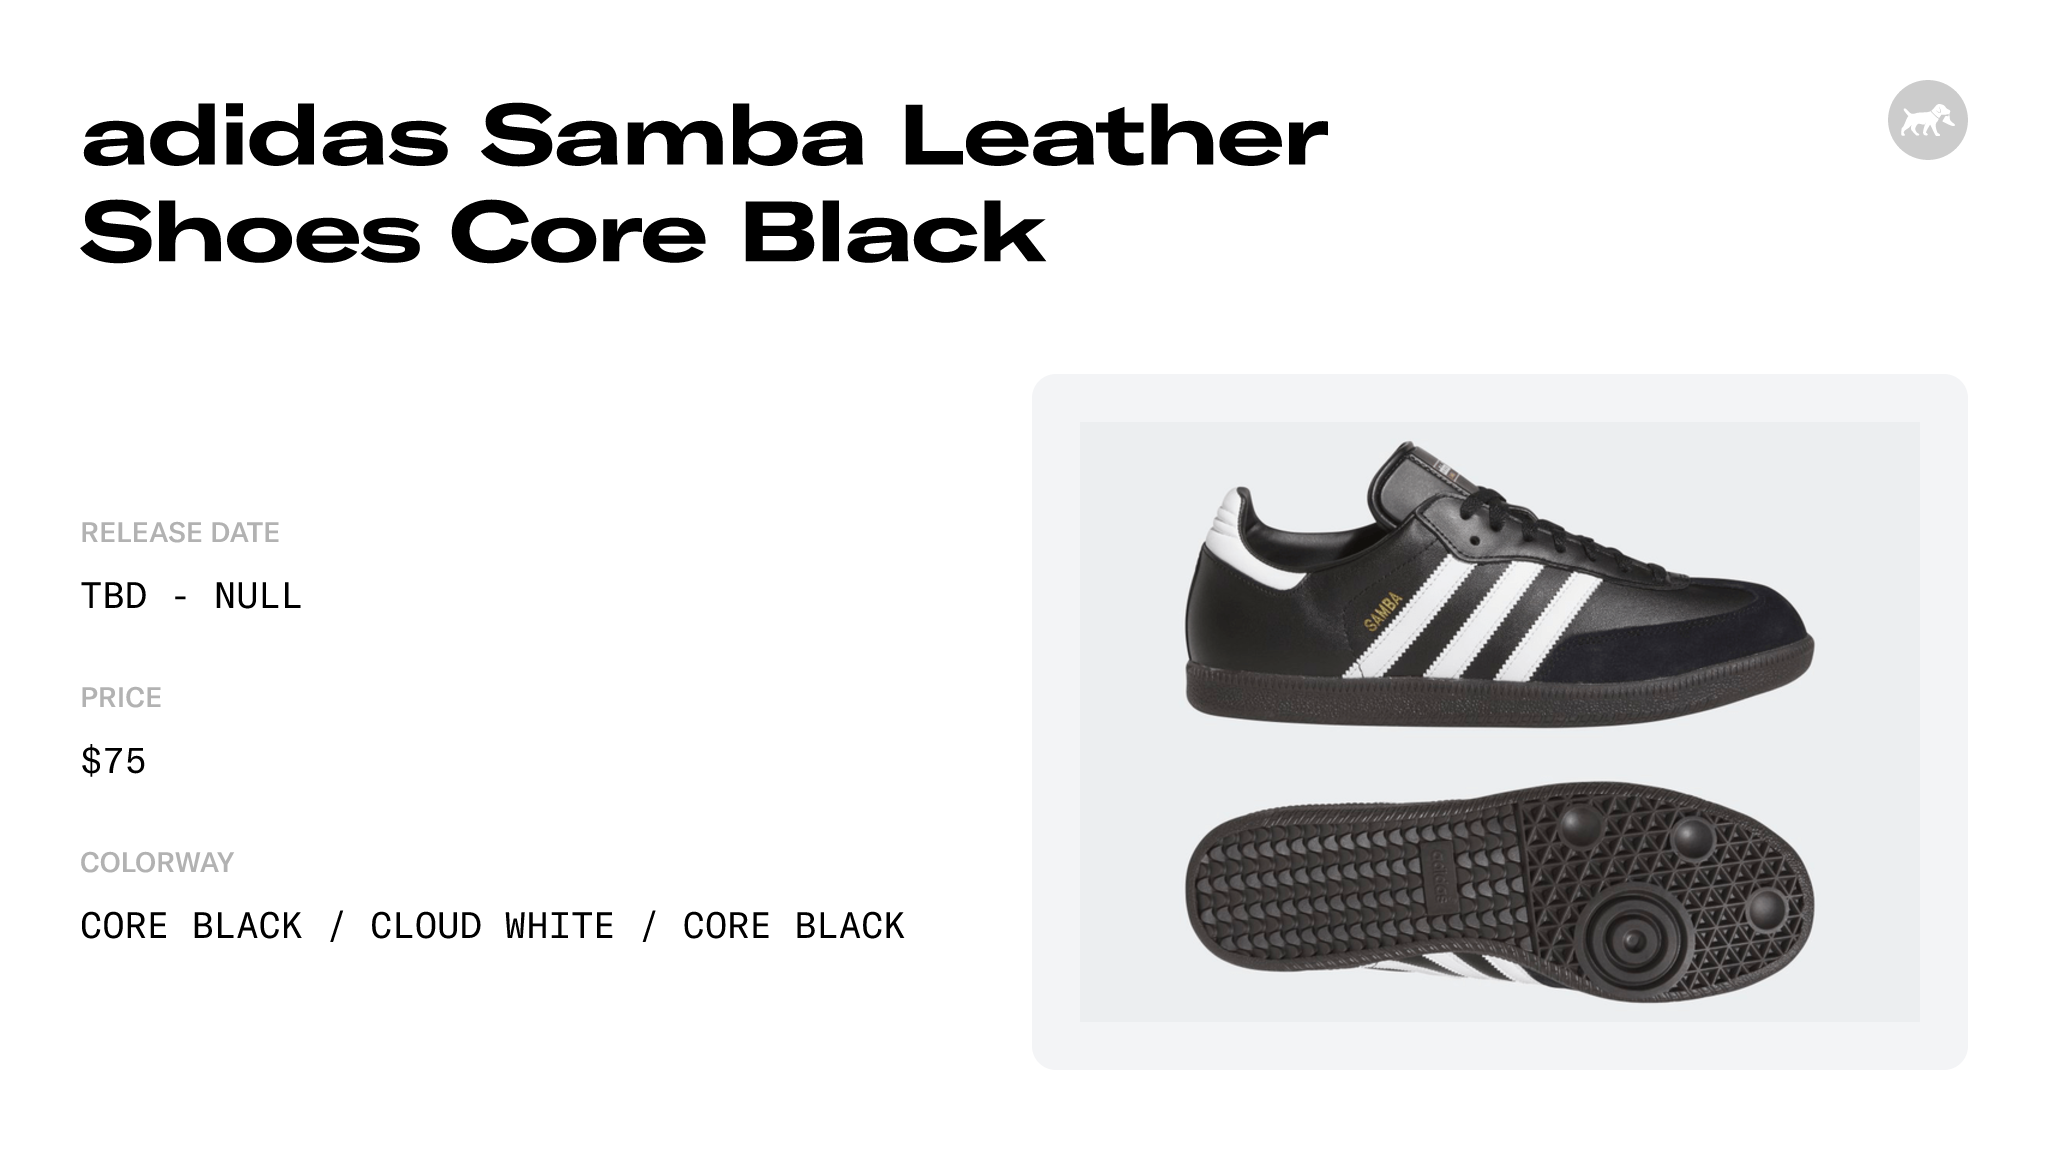 adidas Samba Leather Shoes Core Black - 019000 Raffles and Release